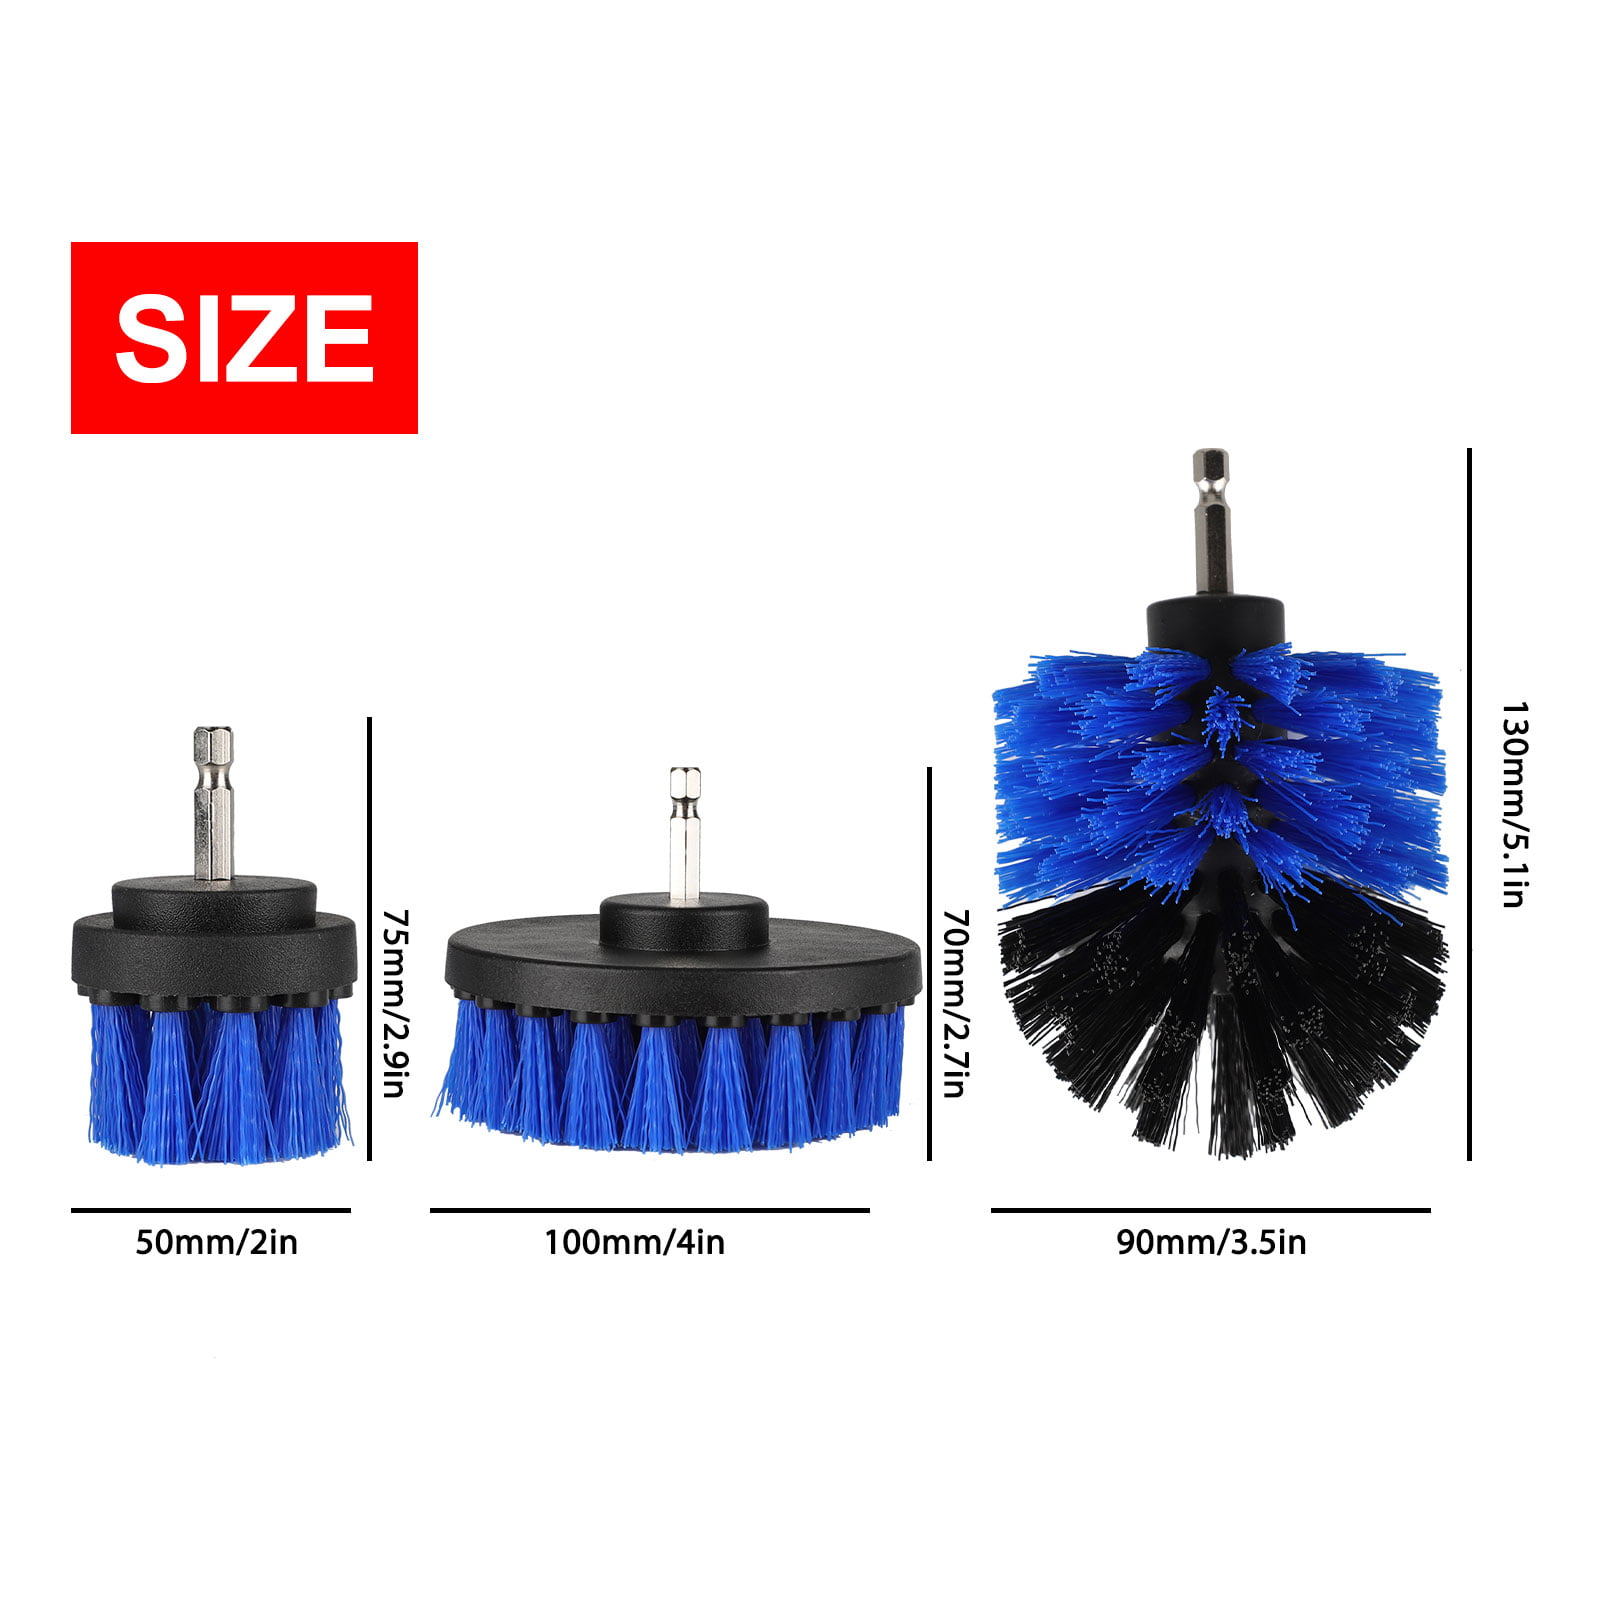 3PACK Electric Drill Cleaning Brush Set For Valeting Tile Wall